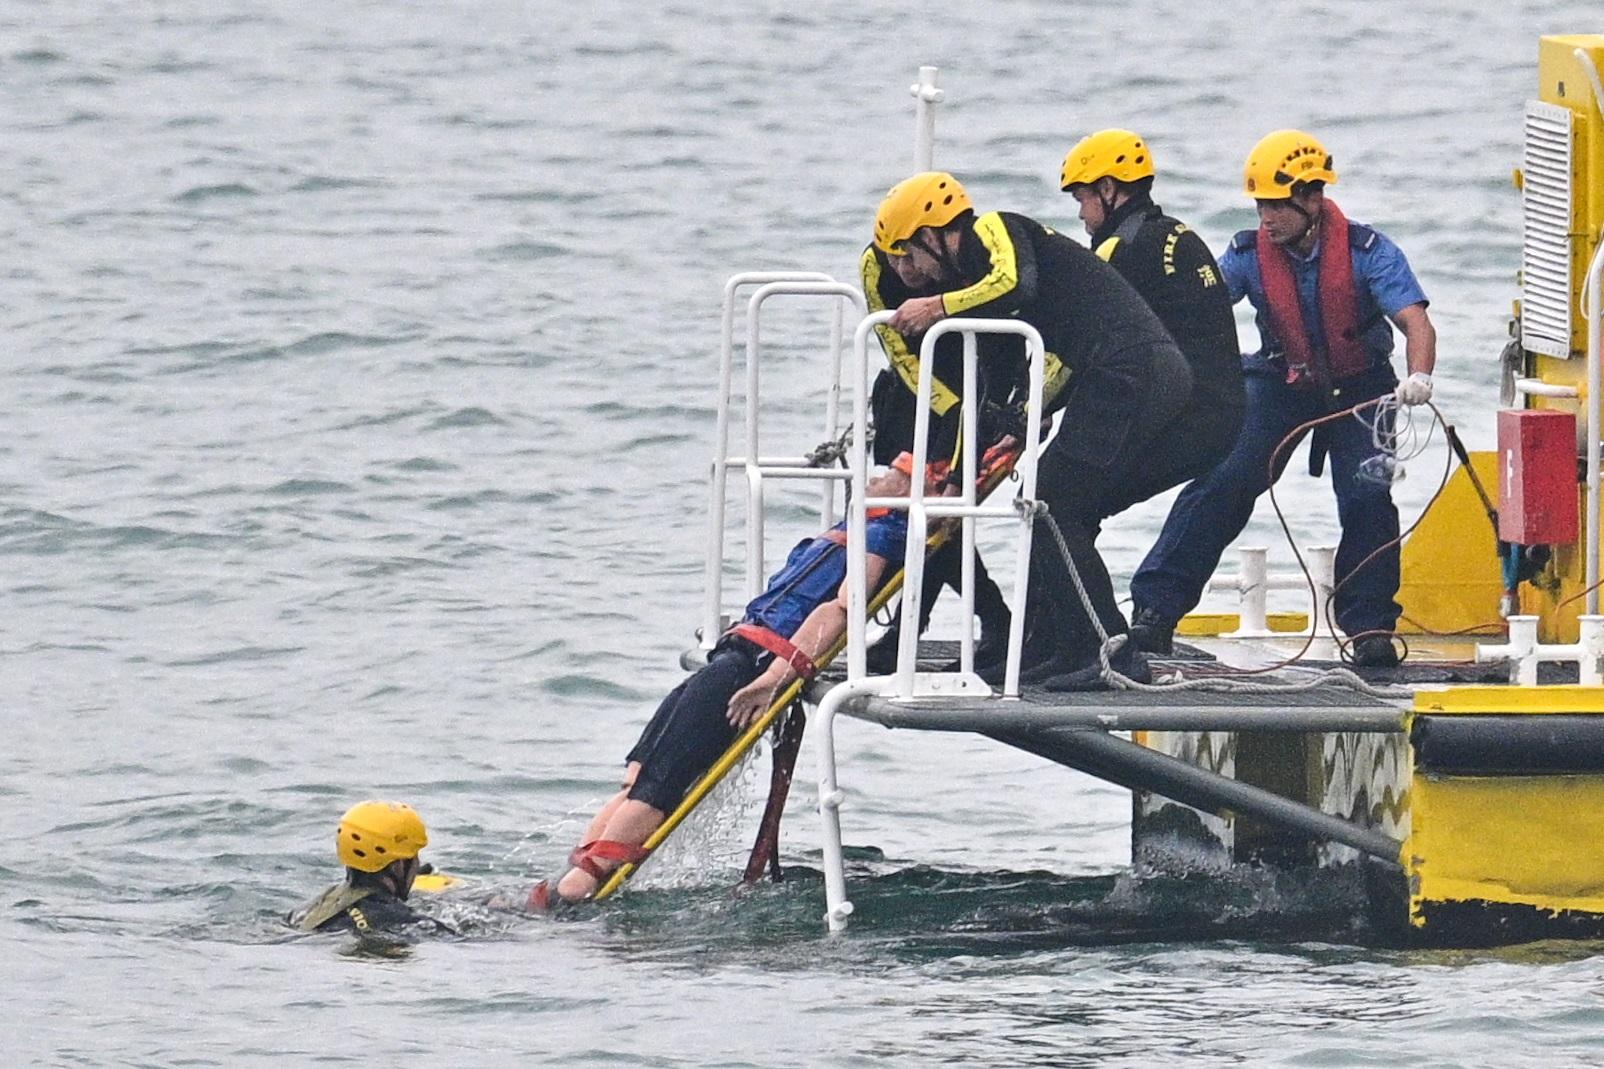 The Civil Aviation Department held a joint short-range search and rescue exercise today (November 29) to simulate a scenario of a helicopter crash at Port Shelter, Sai Kung. Photo shows a simulation of a survivor being rescued and placed aboard a diving support speedboat.